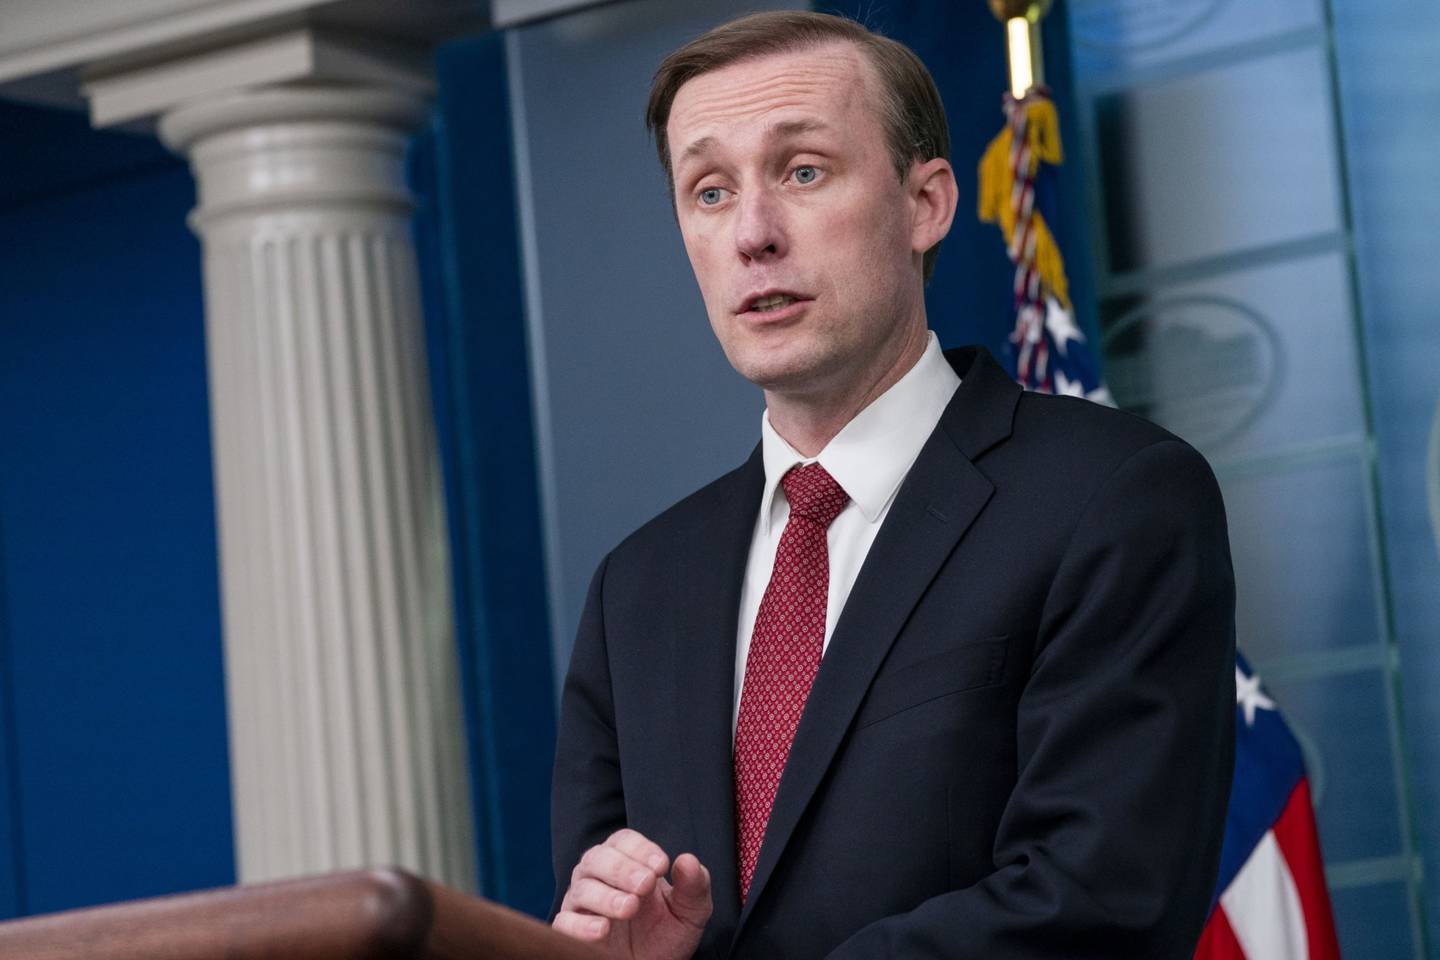 Jake Sullivan, White House national security adviser, speaks during a news conference in the James S. Brady Press Briefing Room at the White House in Washington, D.C., U.S., on Friday, Feb. 11, 2022. Sullivan said The United States believes Russia could take offensive military action or attempt to spark a conflict inside Ukraine as early as next week. Photographer: Shawn Thew/EPA/Bloomberg